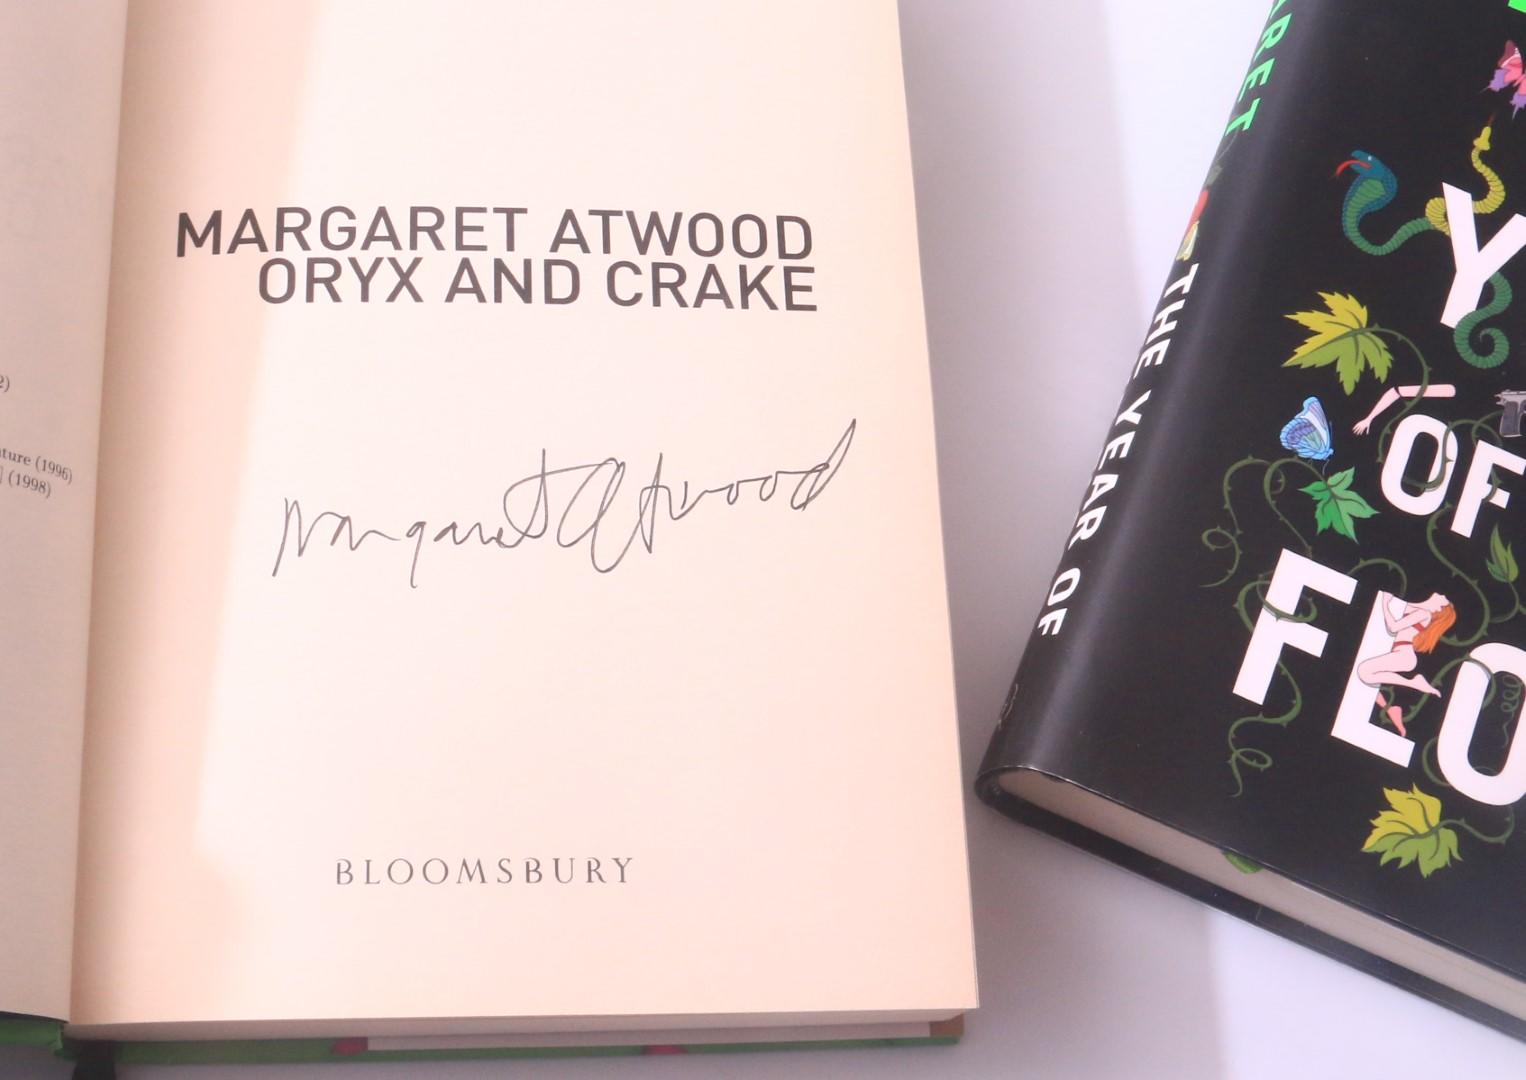 Margaret Atwood - The MaddAddam Trilogy [comprising] Oryx and Crake, The Year of the Flood and MaddAddam - Bloomsbury, 2003-2013, Signed First Edition.